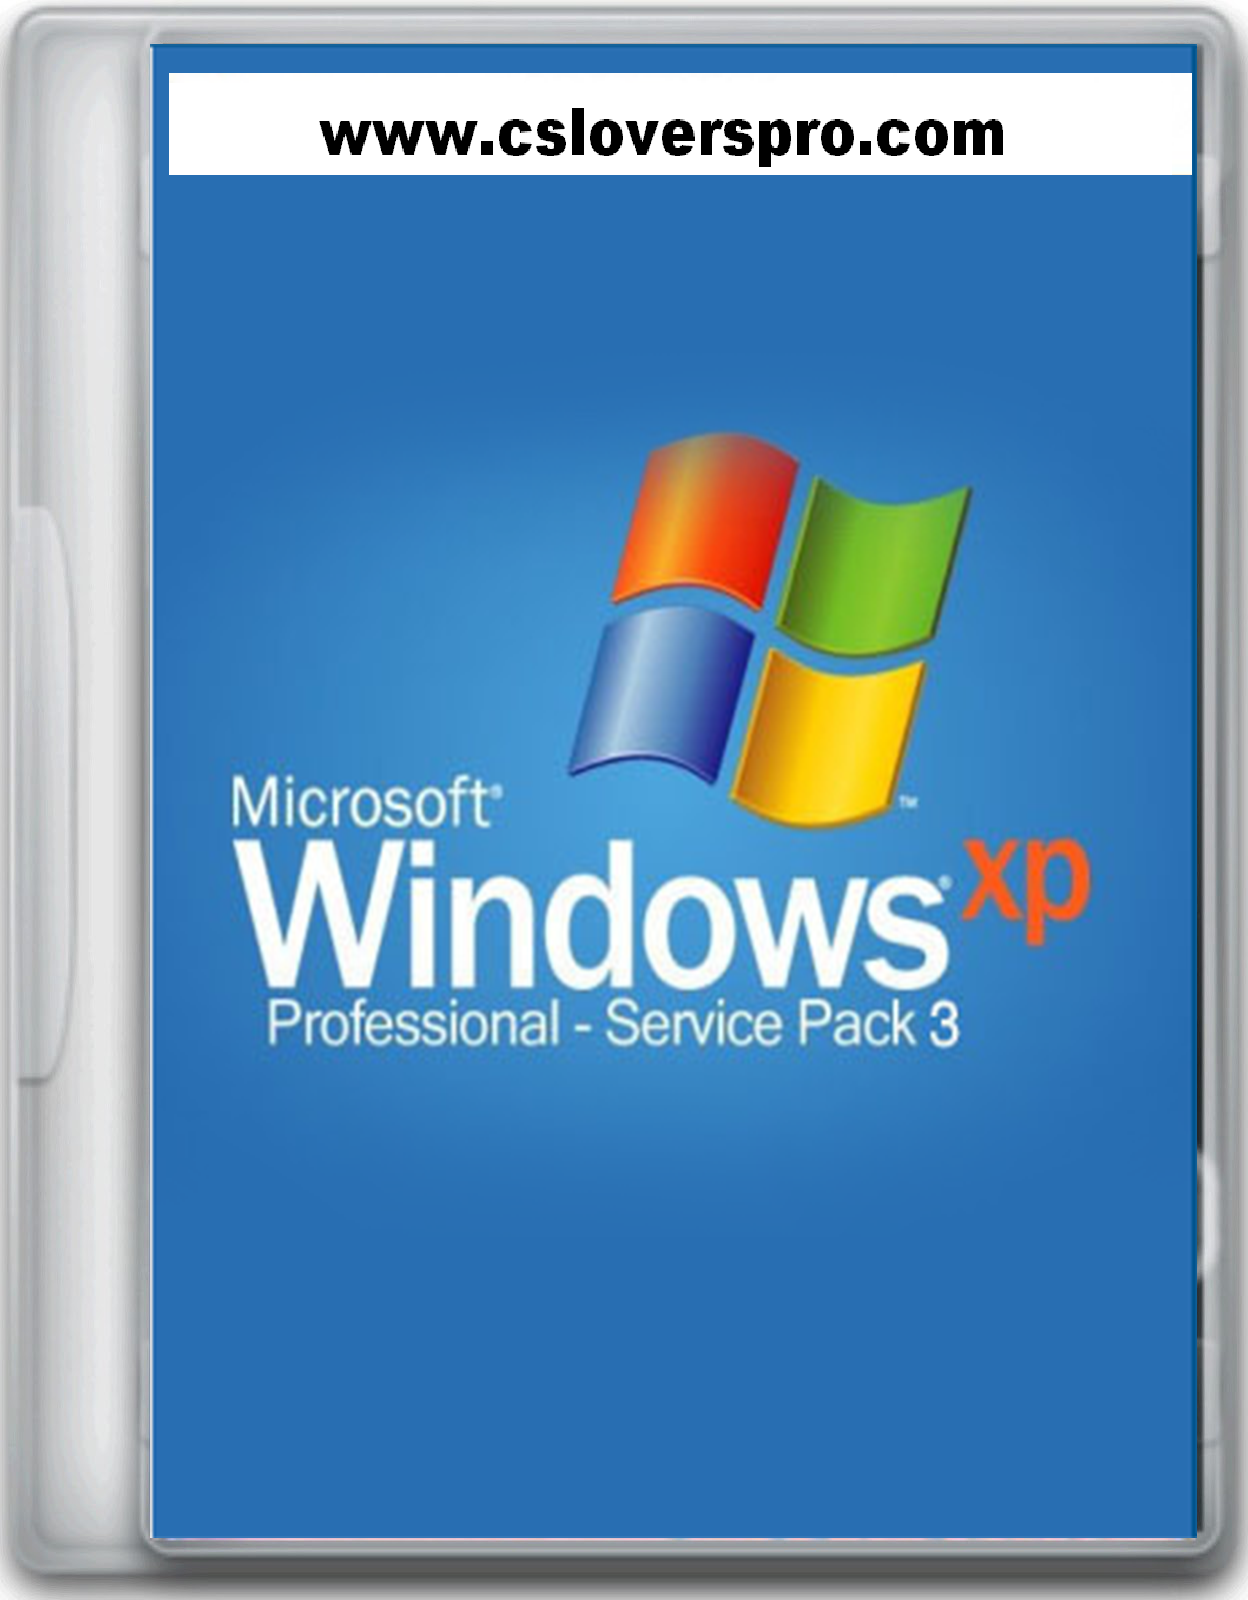 activex control for windows xp sp3 free download